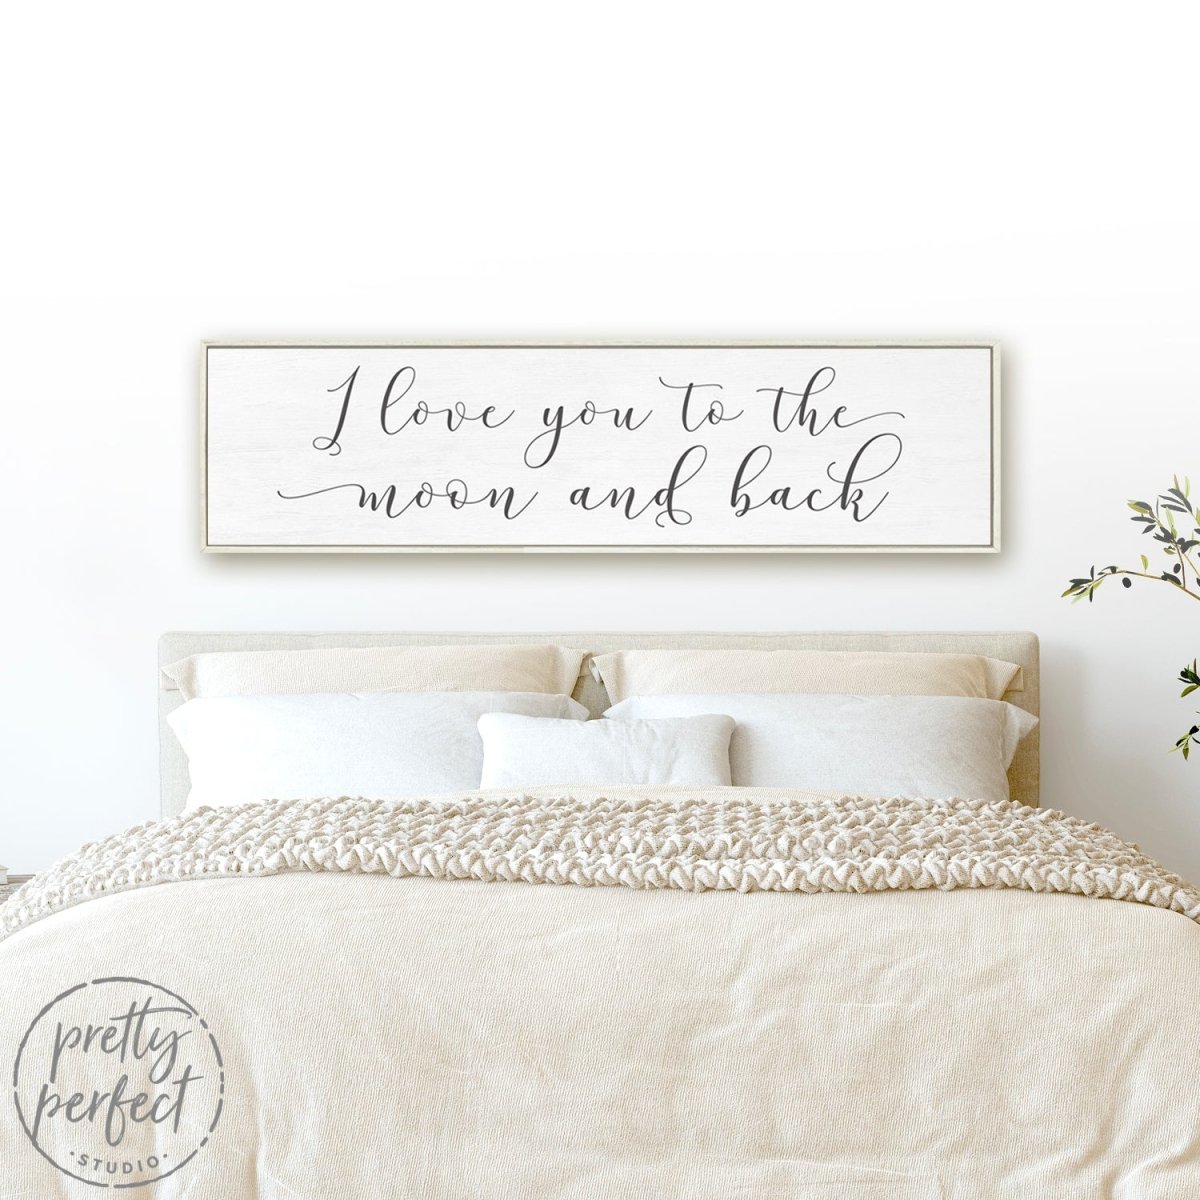 Love You To The Moon And Back Sign Above Bed in Couples Bedroom - Pretty Perfect Studio